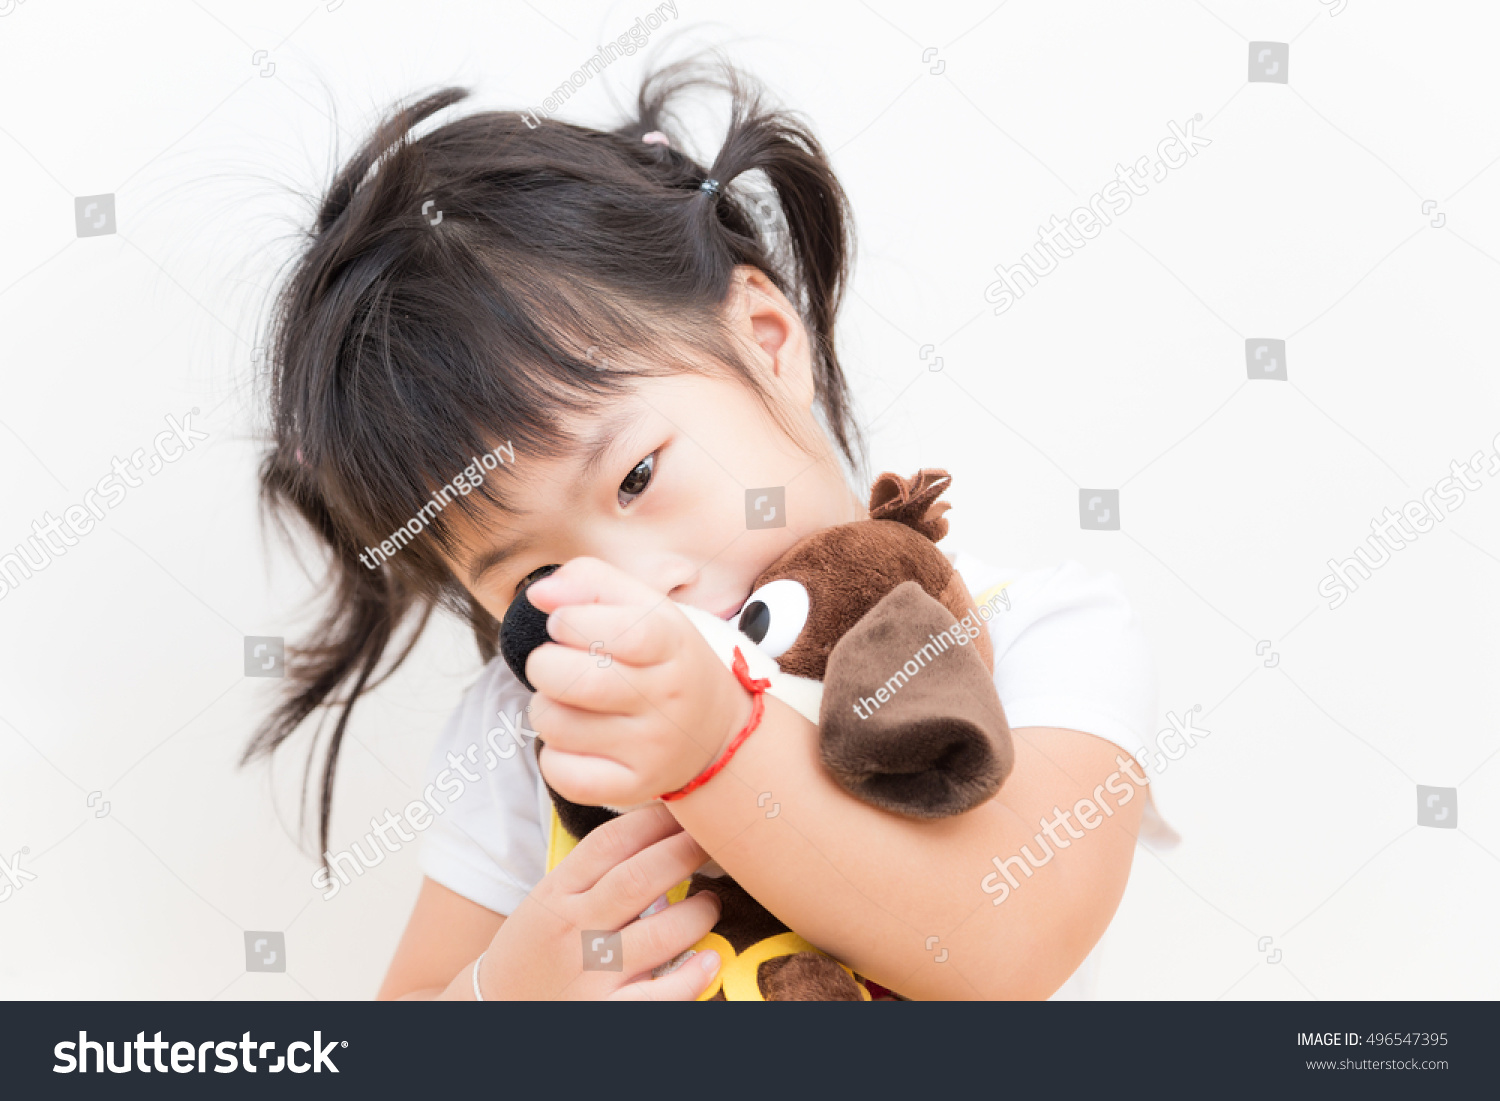 Little Girl Playing With Baby Doll Stock Photo - Image ...